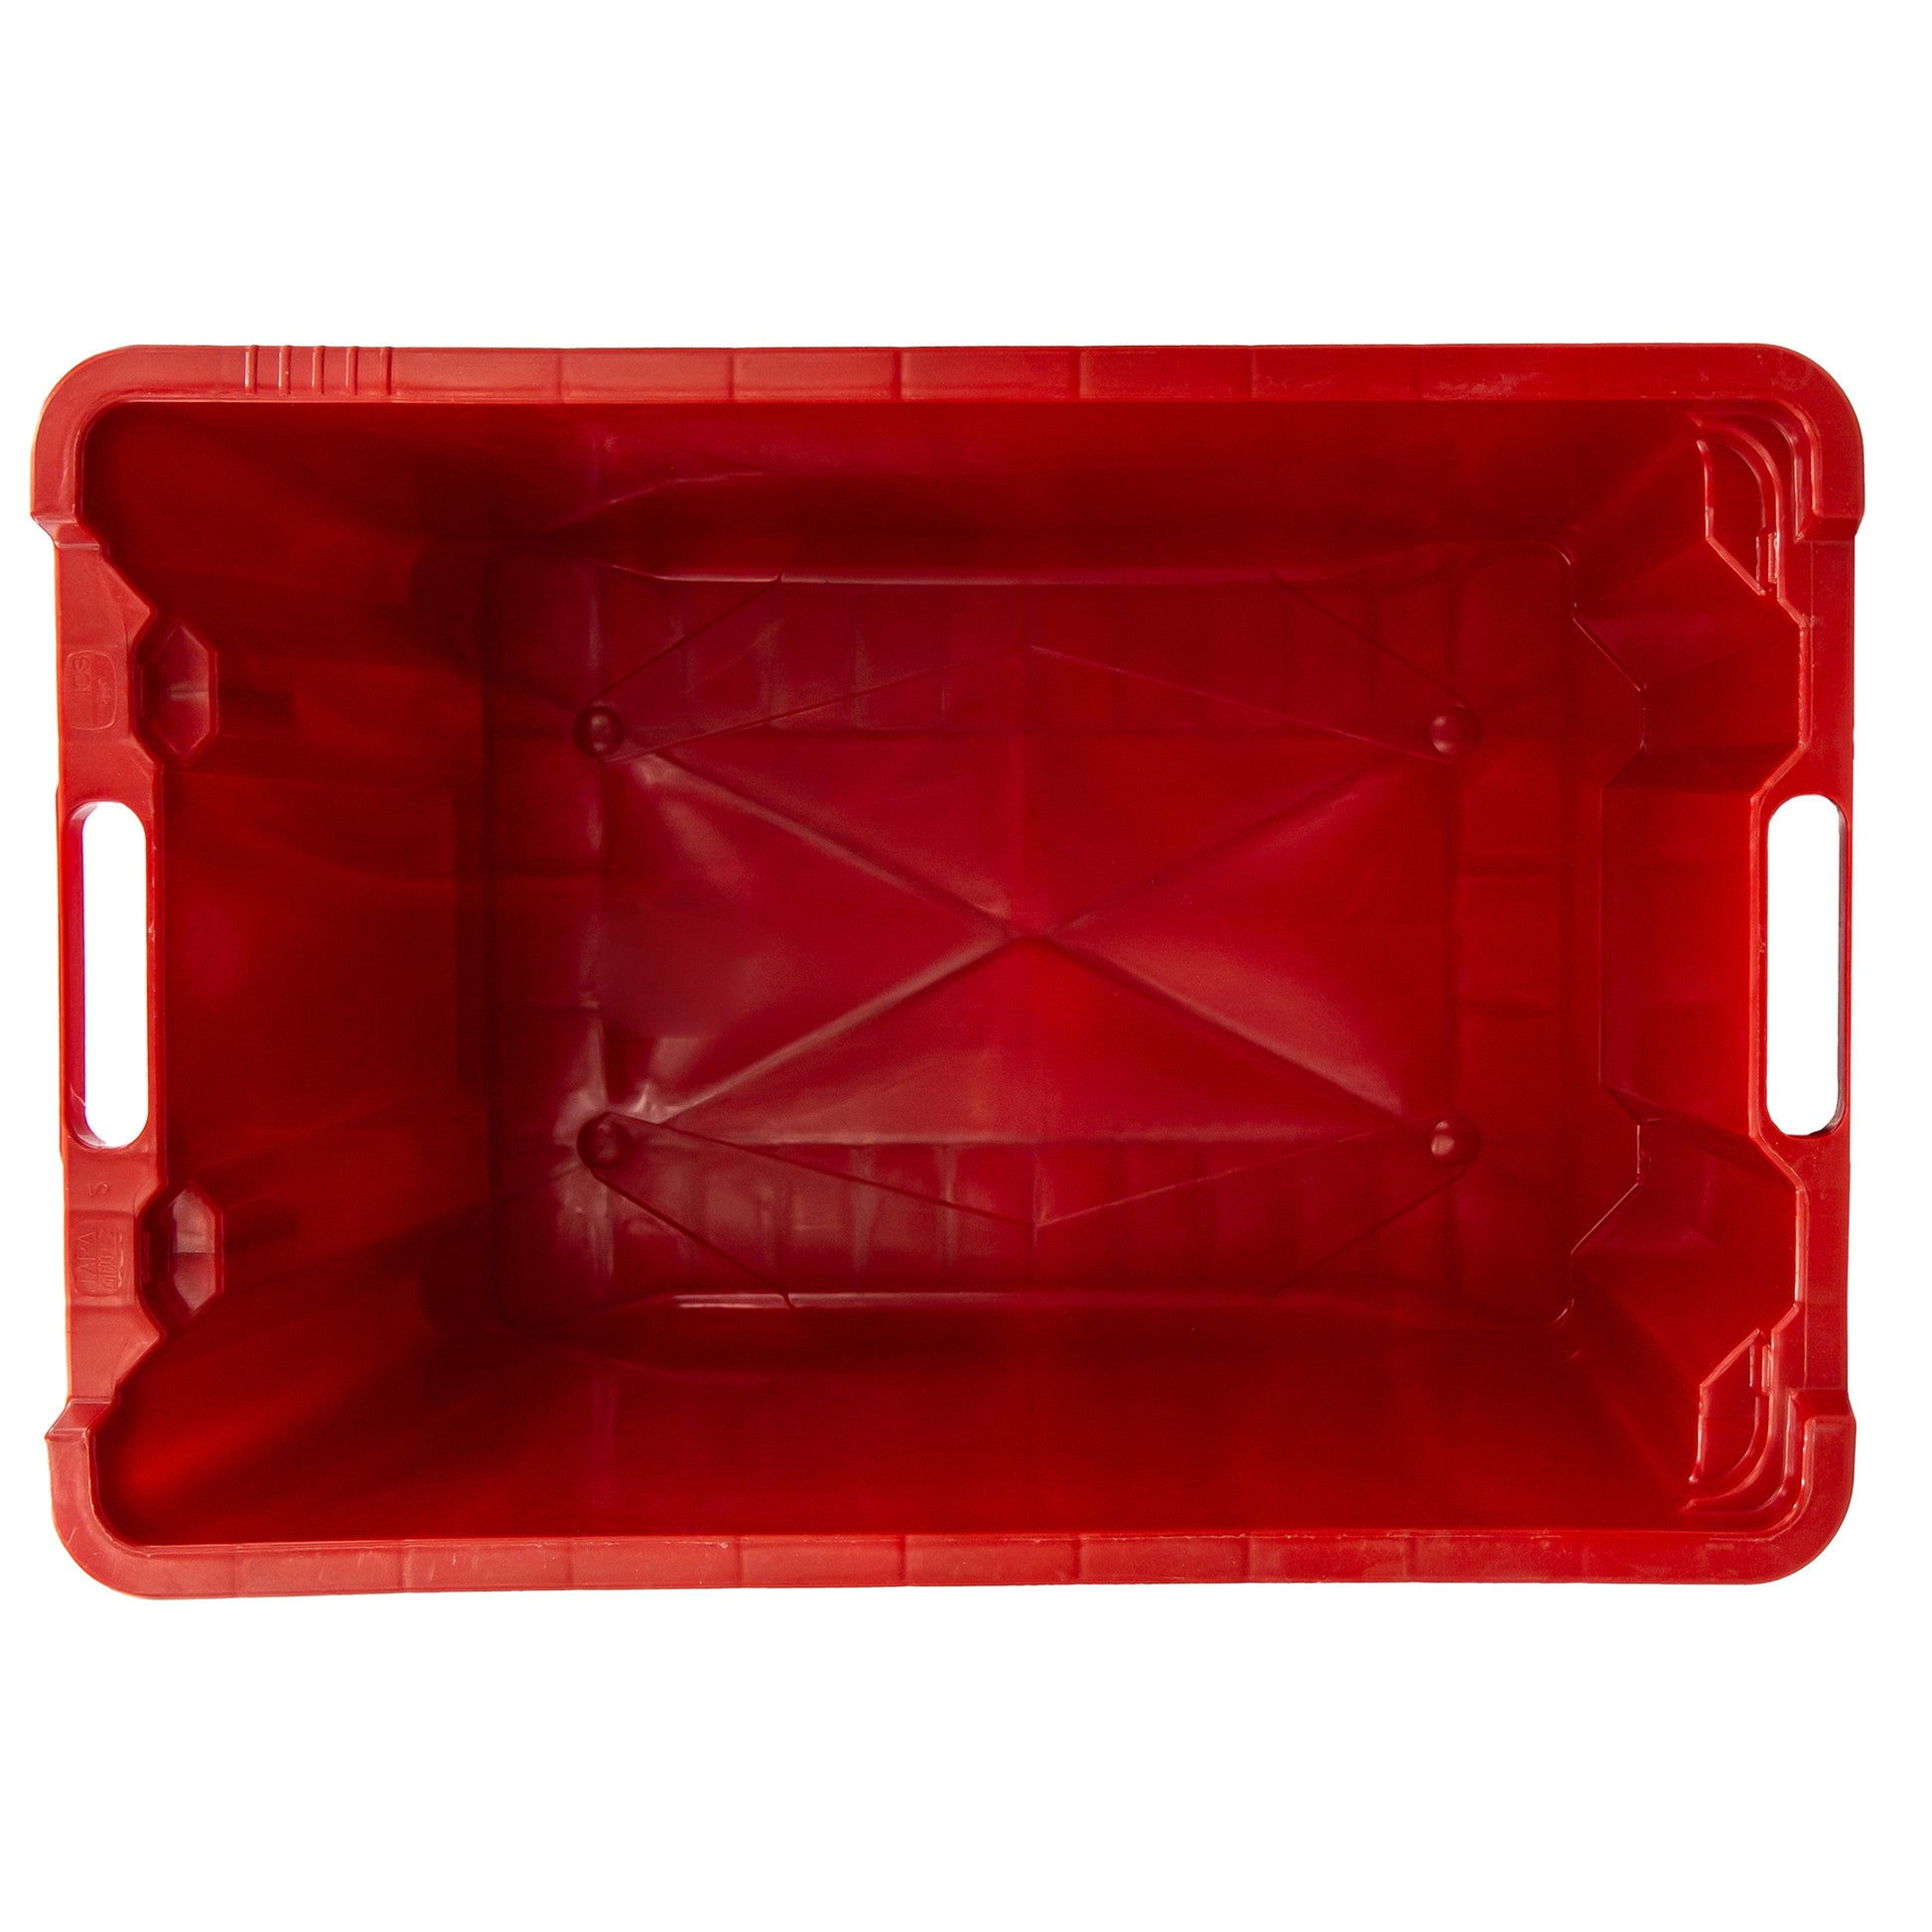 40 litre red solid food grade plastic crate. Used in salami, sausage and passata making